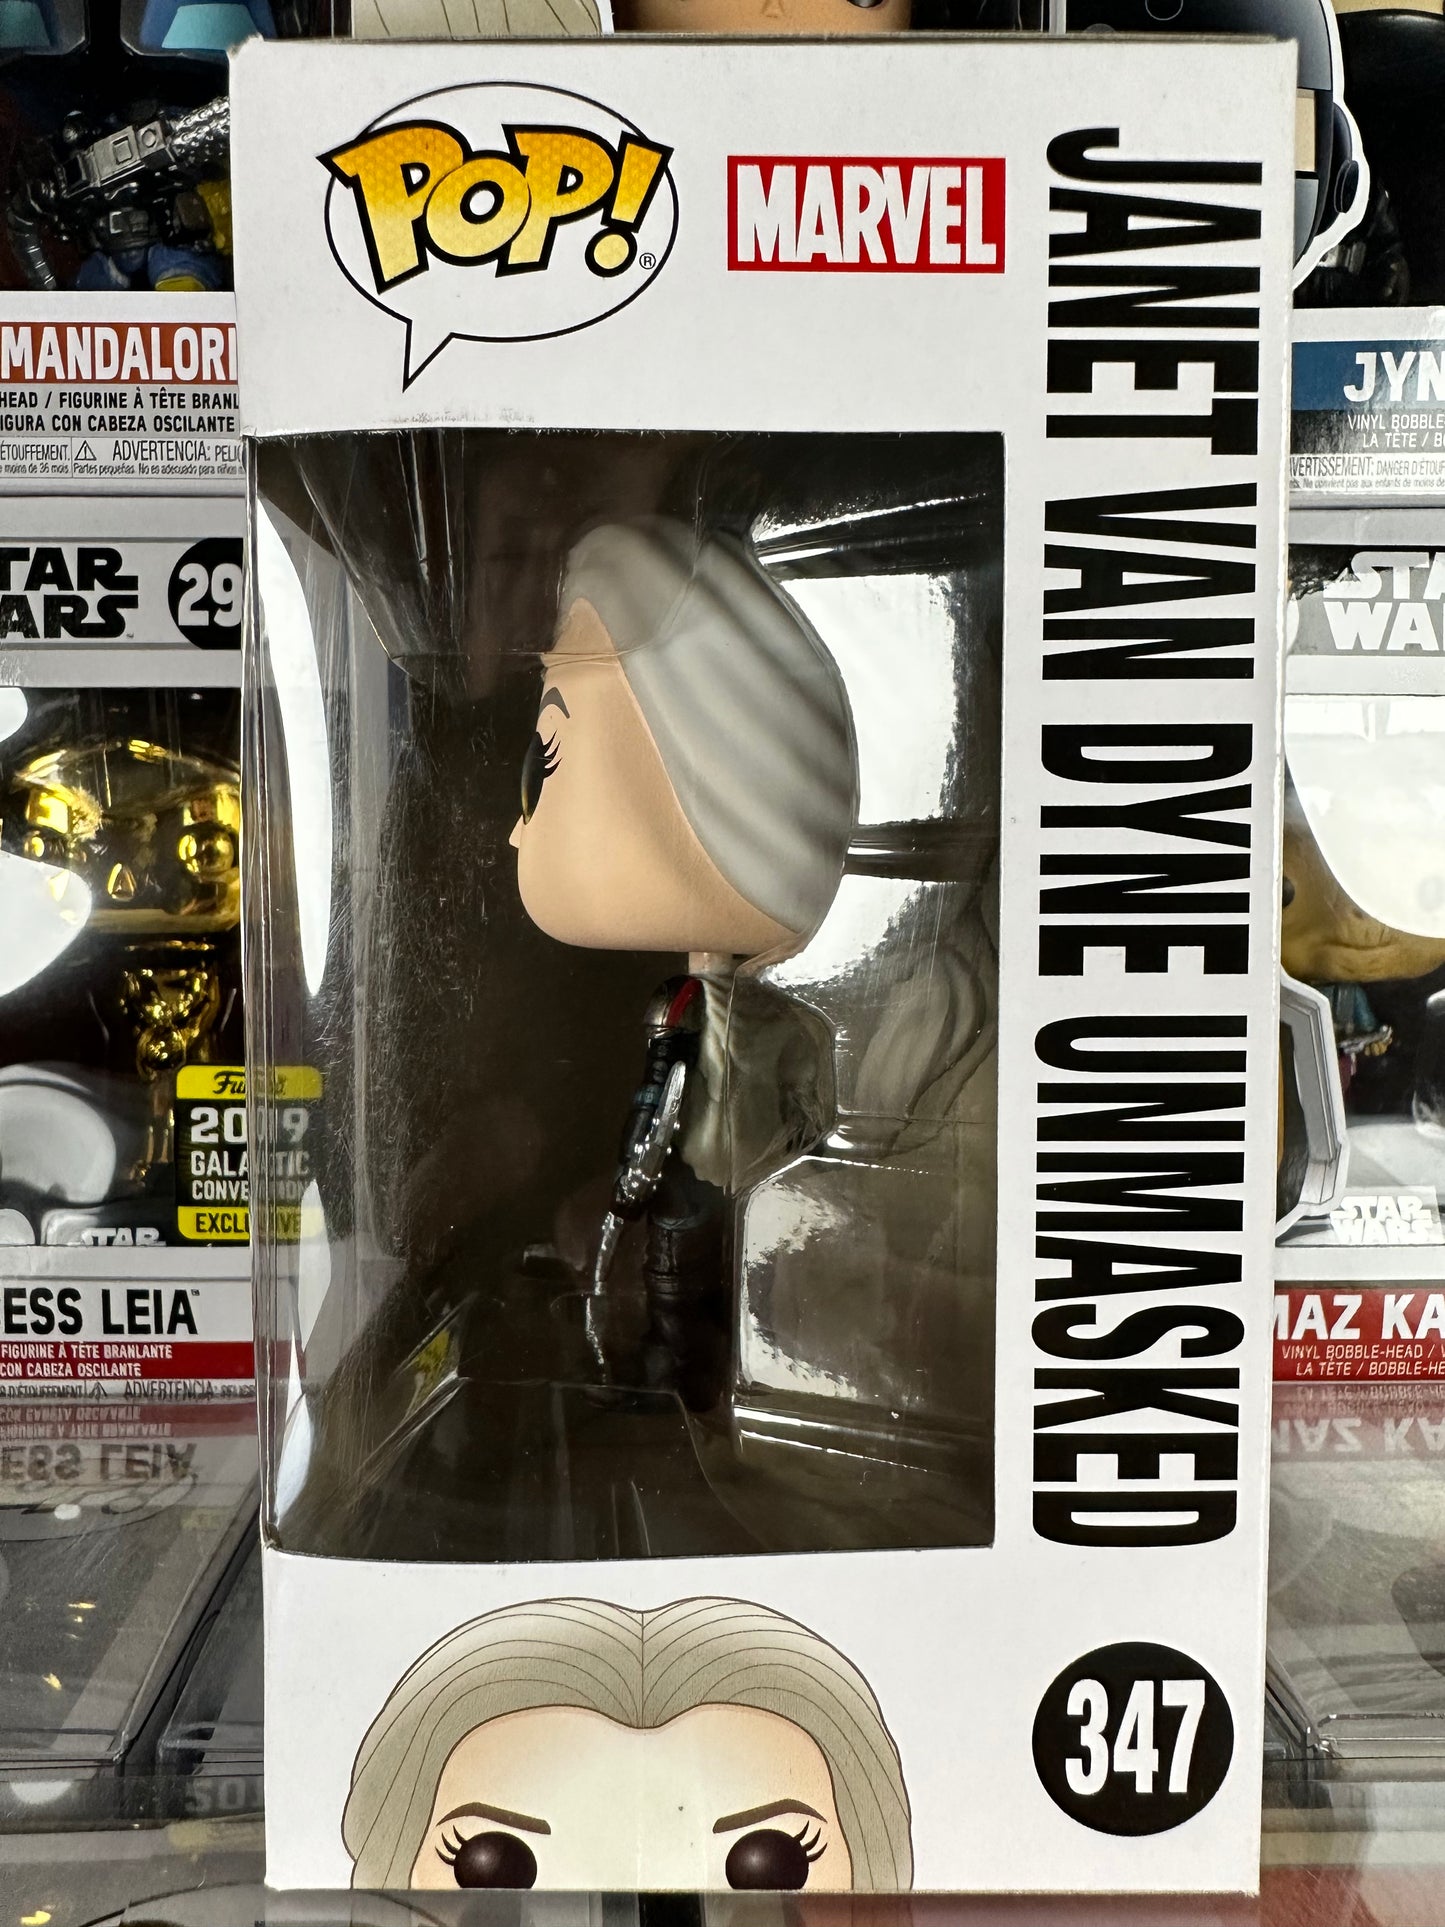 Marvel Ant-Man and The Wasp - Janet Van Dyne Unmasked (347) Vaulted